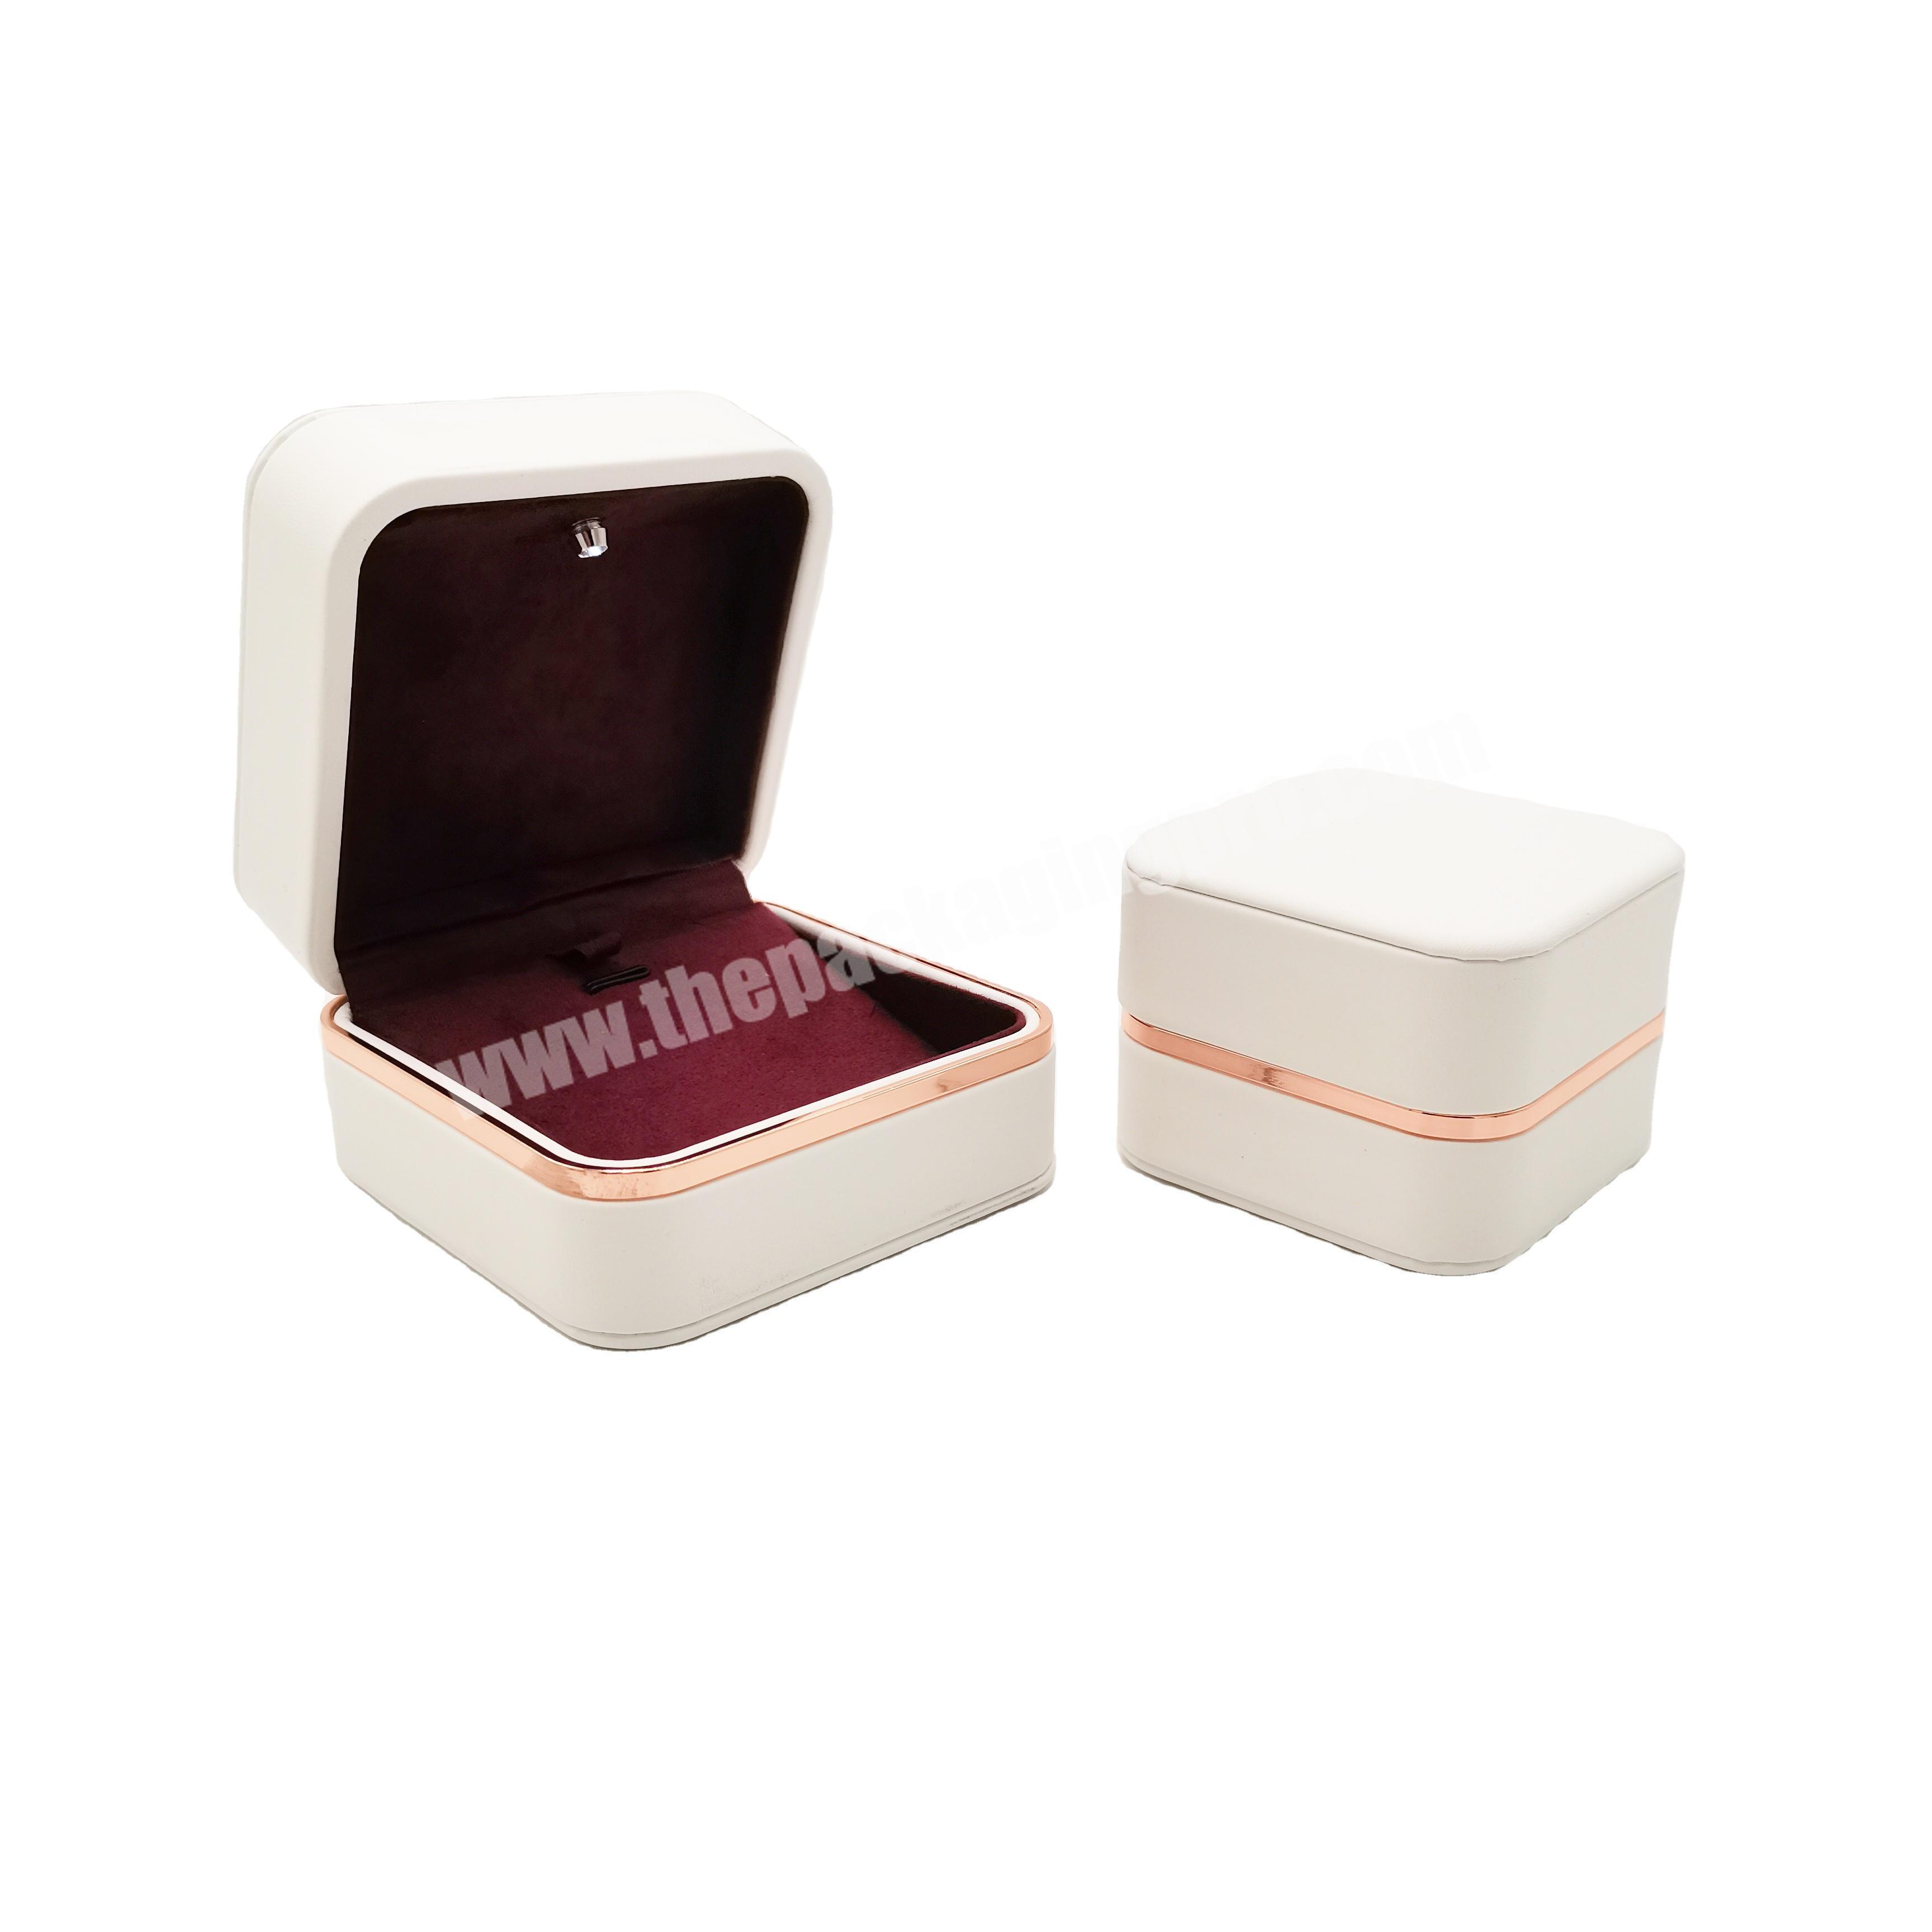 Kexin in stock Custom Gift Luxury Jewelry Packaging with LED light large Jewelry Box